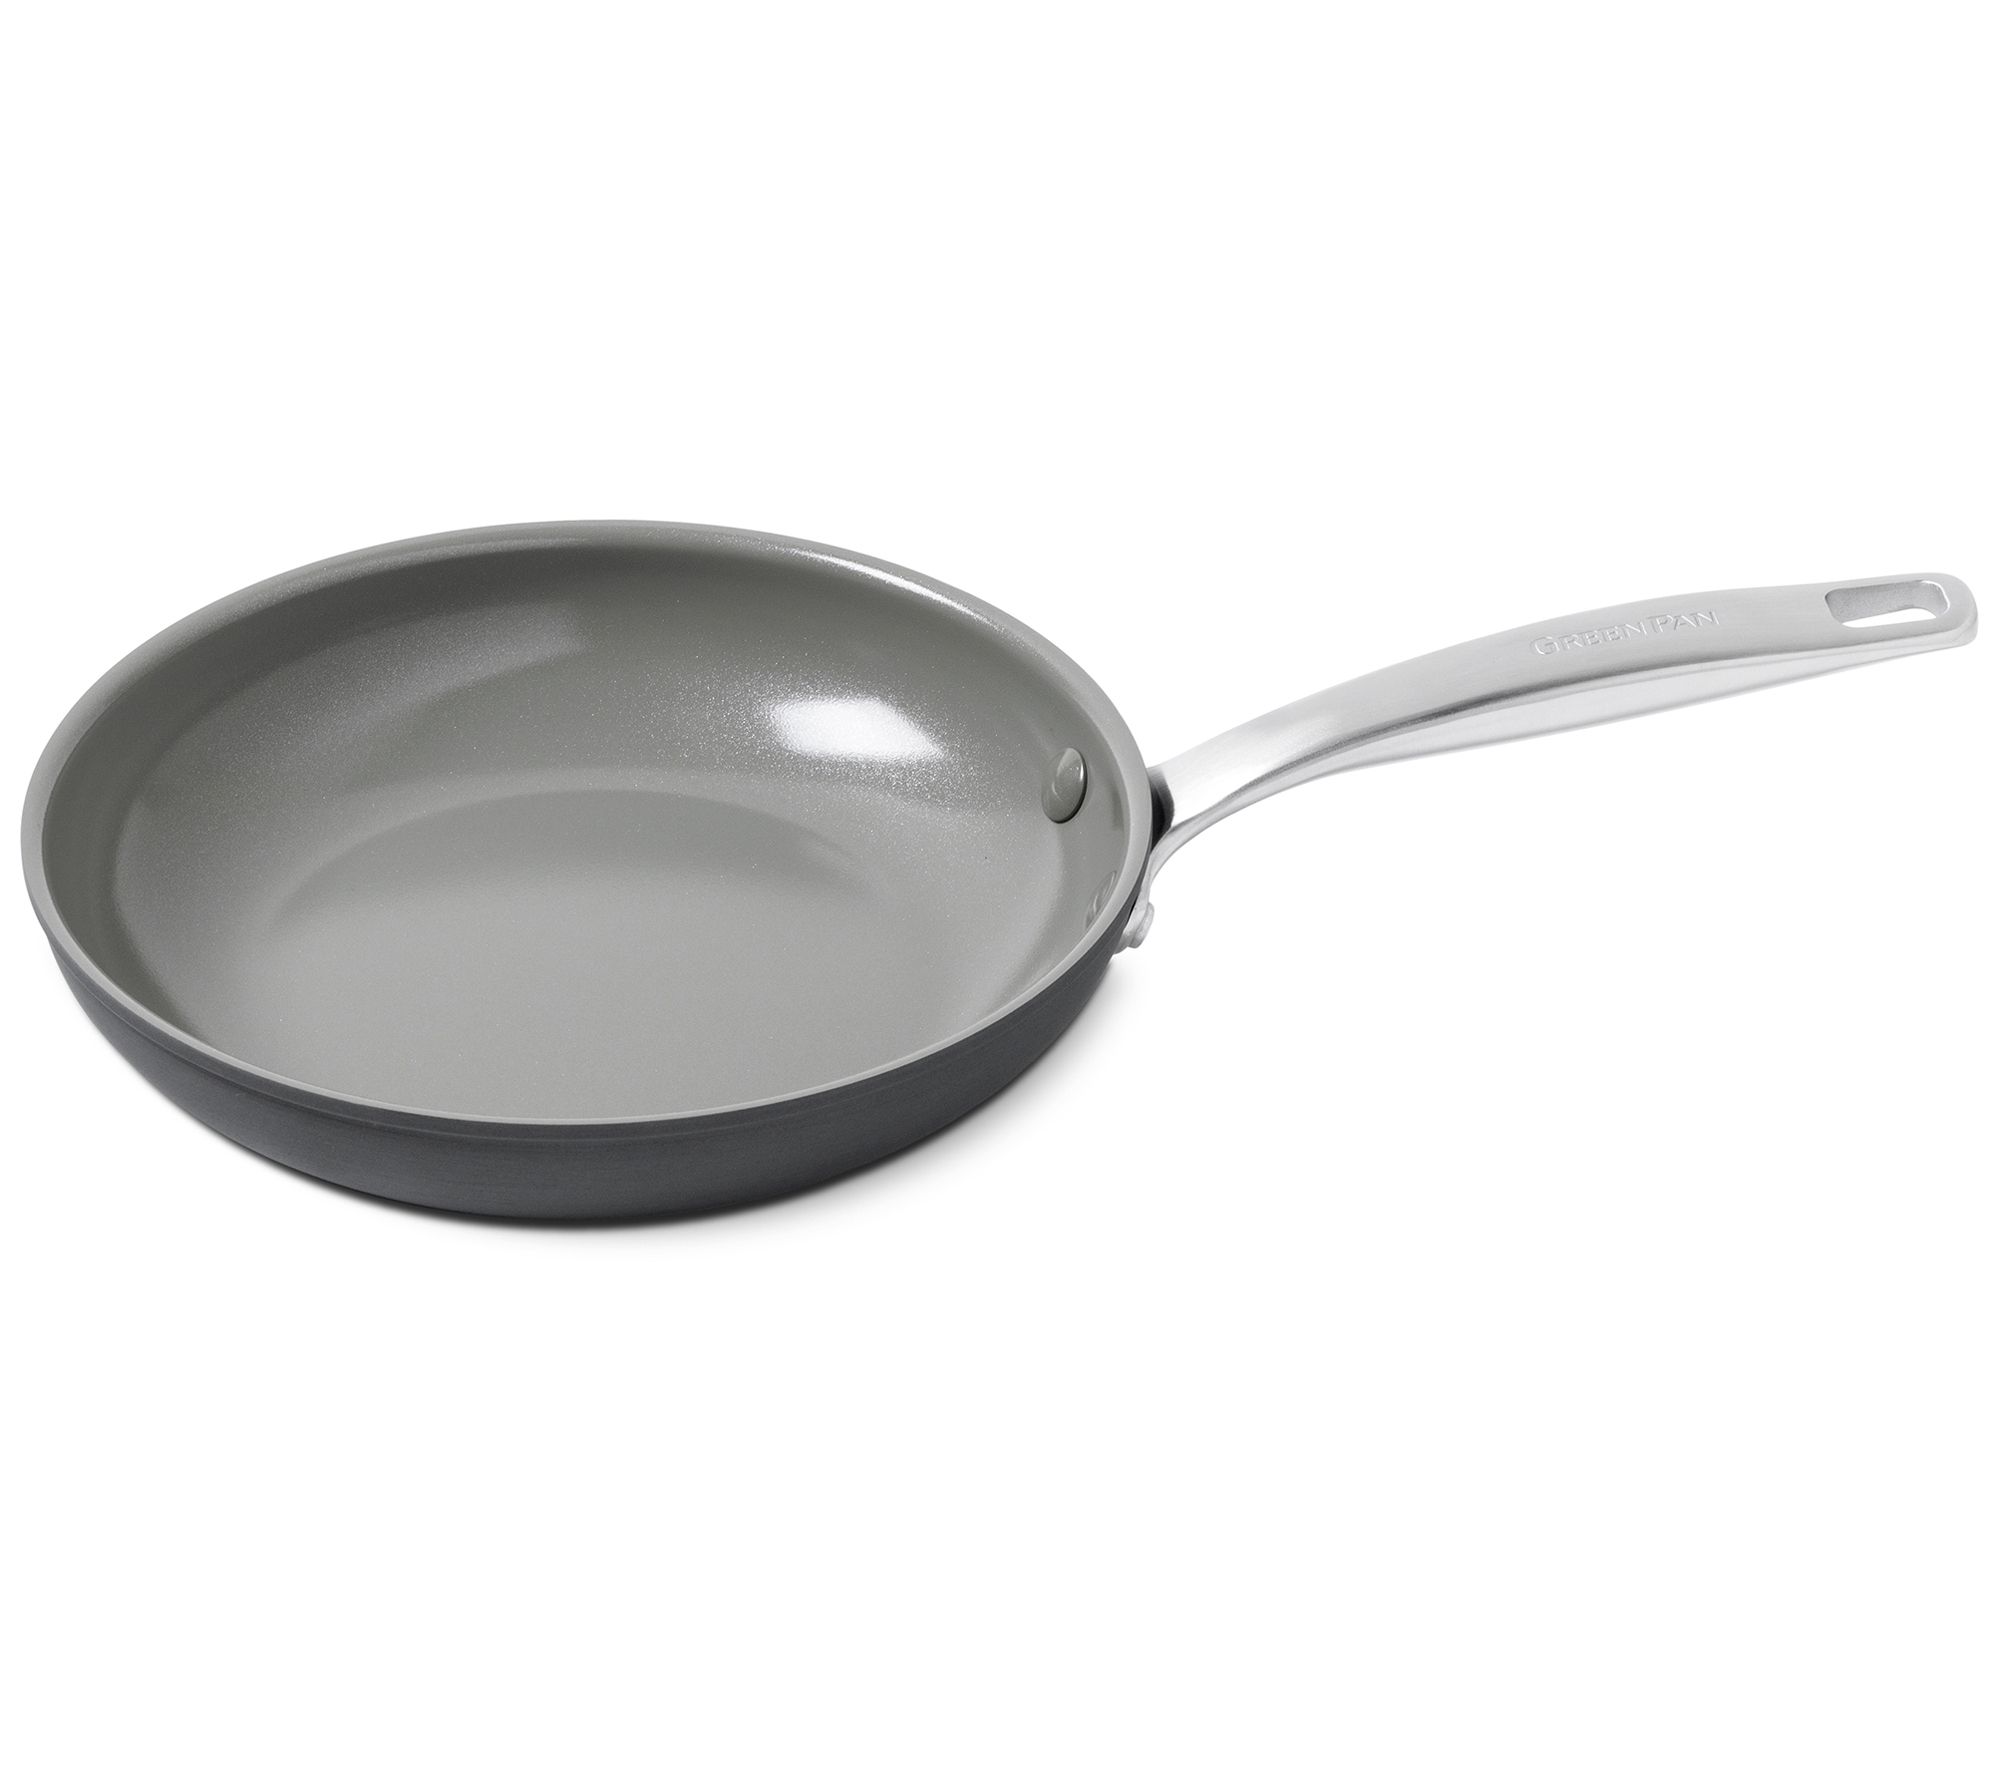 Kitchenaid 5-ply Clad Stainless Steel 8.25 Nonstick Frying Pan : Target